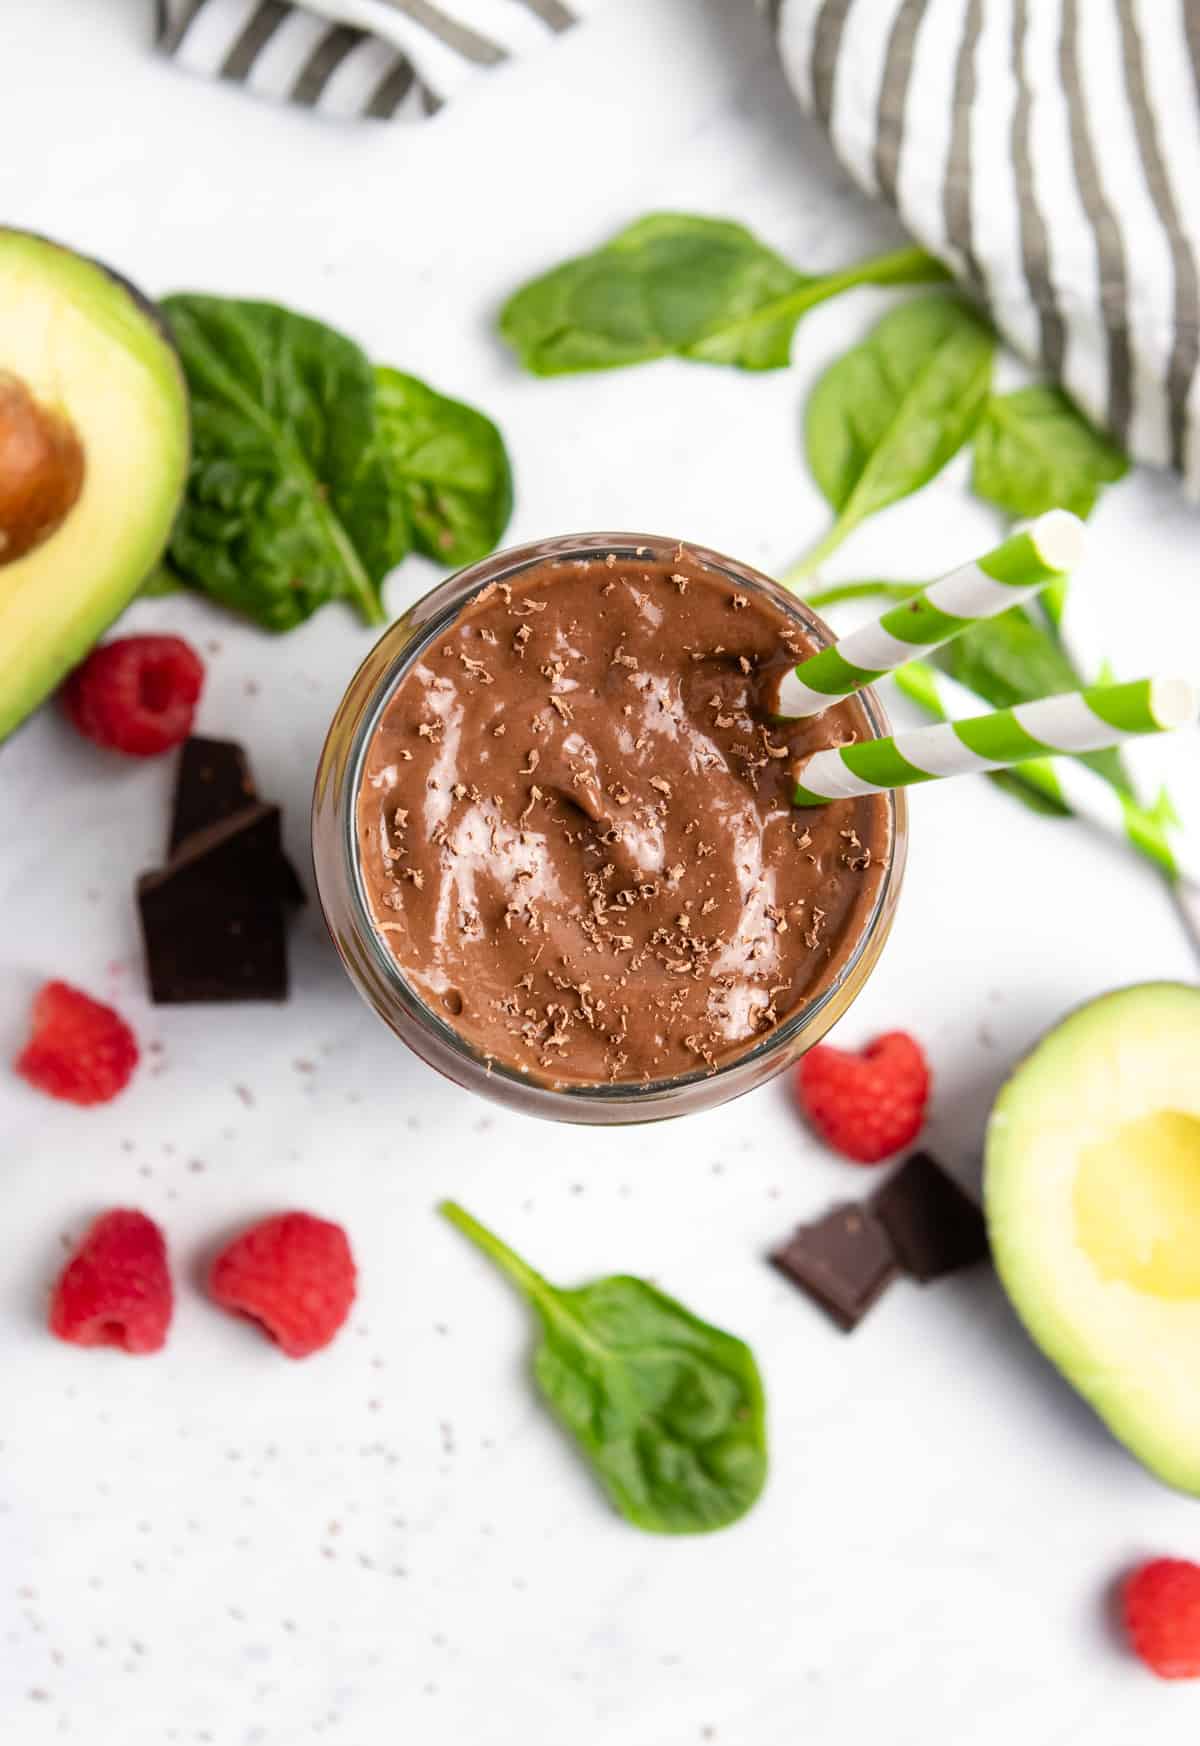 Overhead view of chocolate smoothie with spinach, avocado and raspberries next to it.